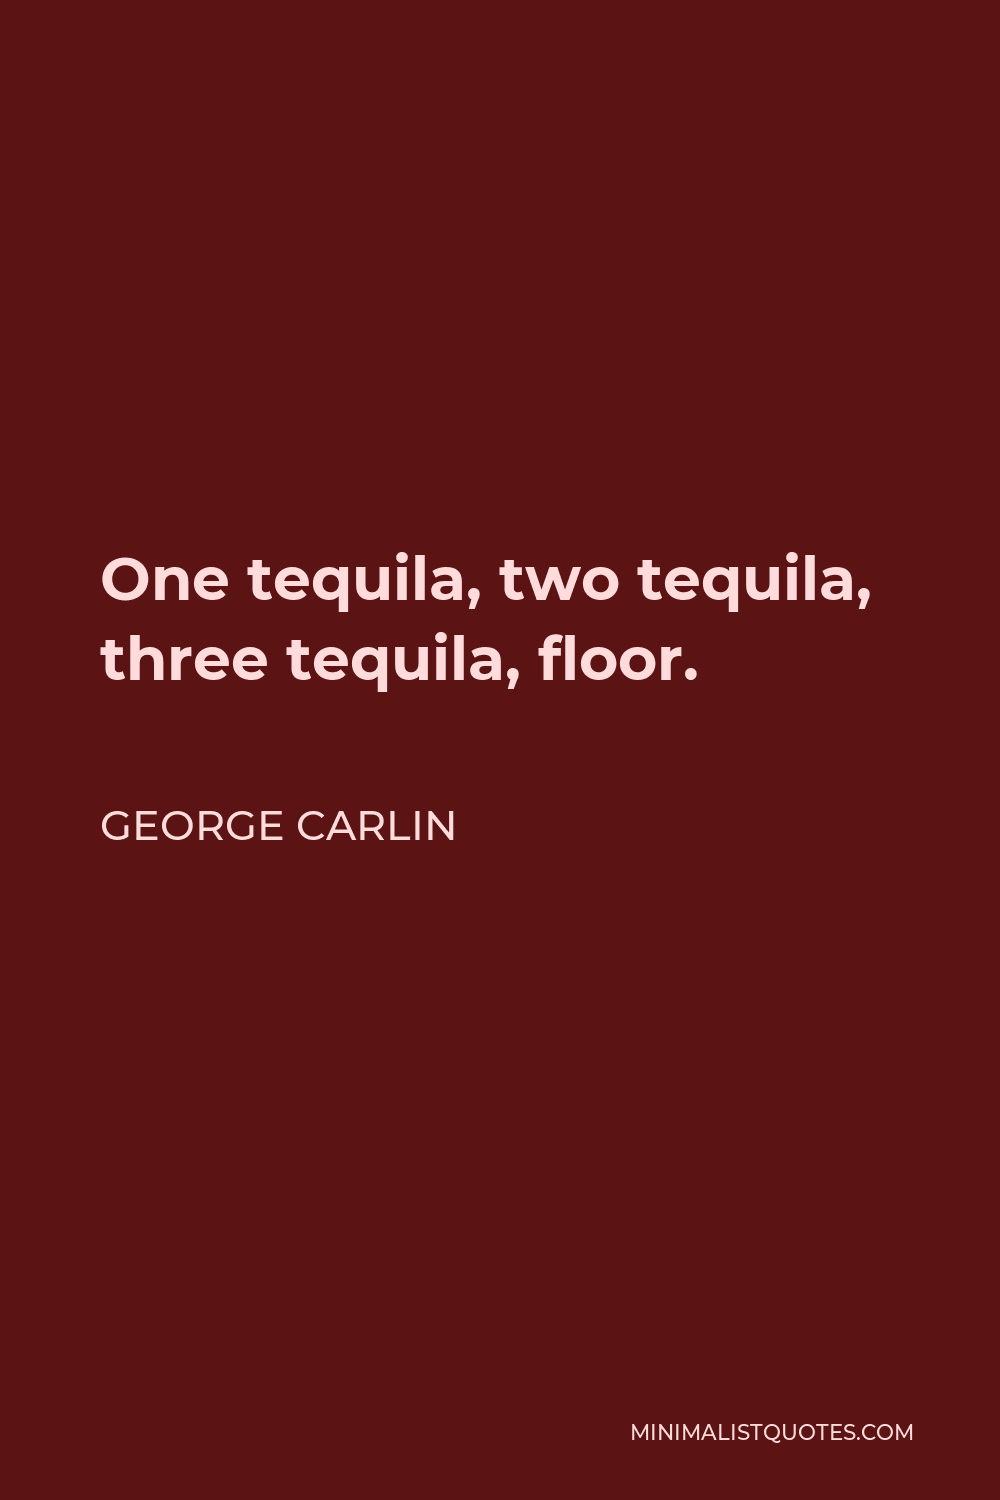 George Carlin Quote - One tequila, two tequila, three tequila, floor.